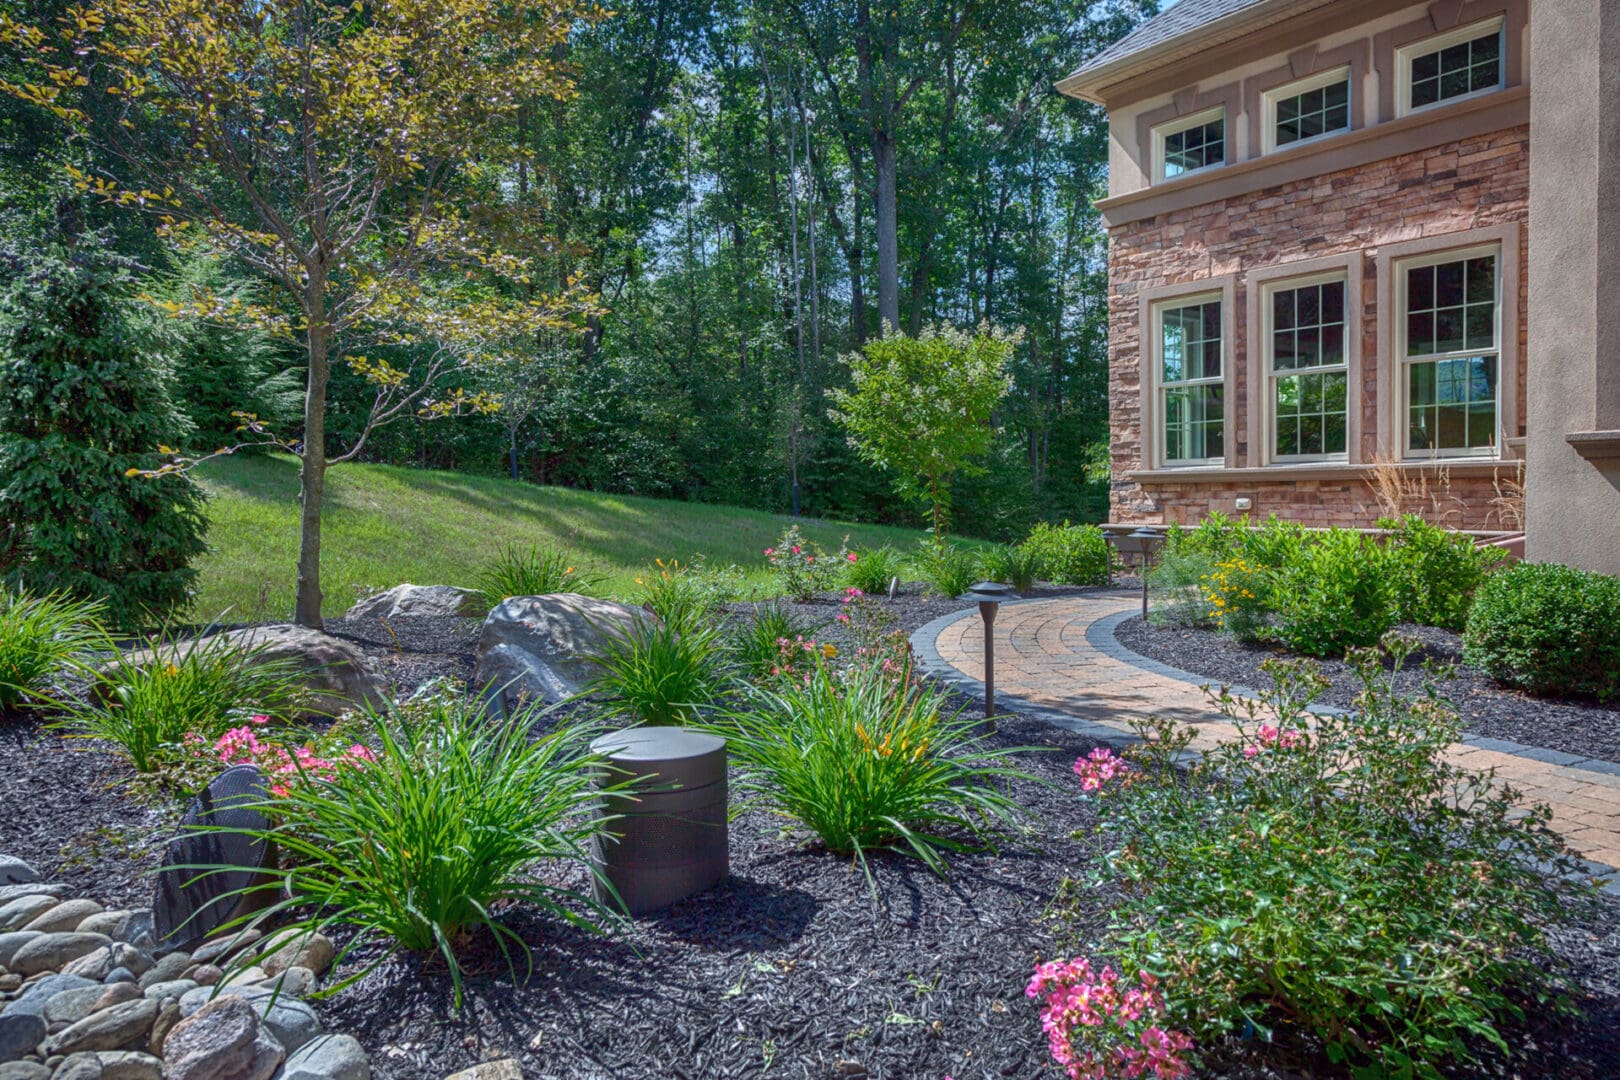 A home with a stone walkway, outdoor lighting, and landscaping.